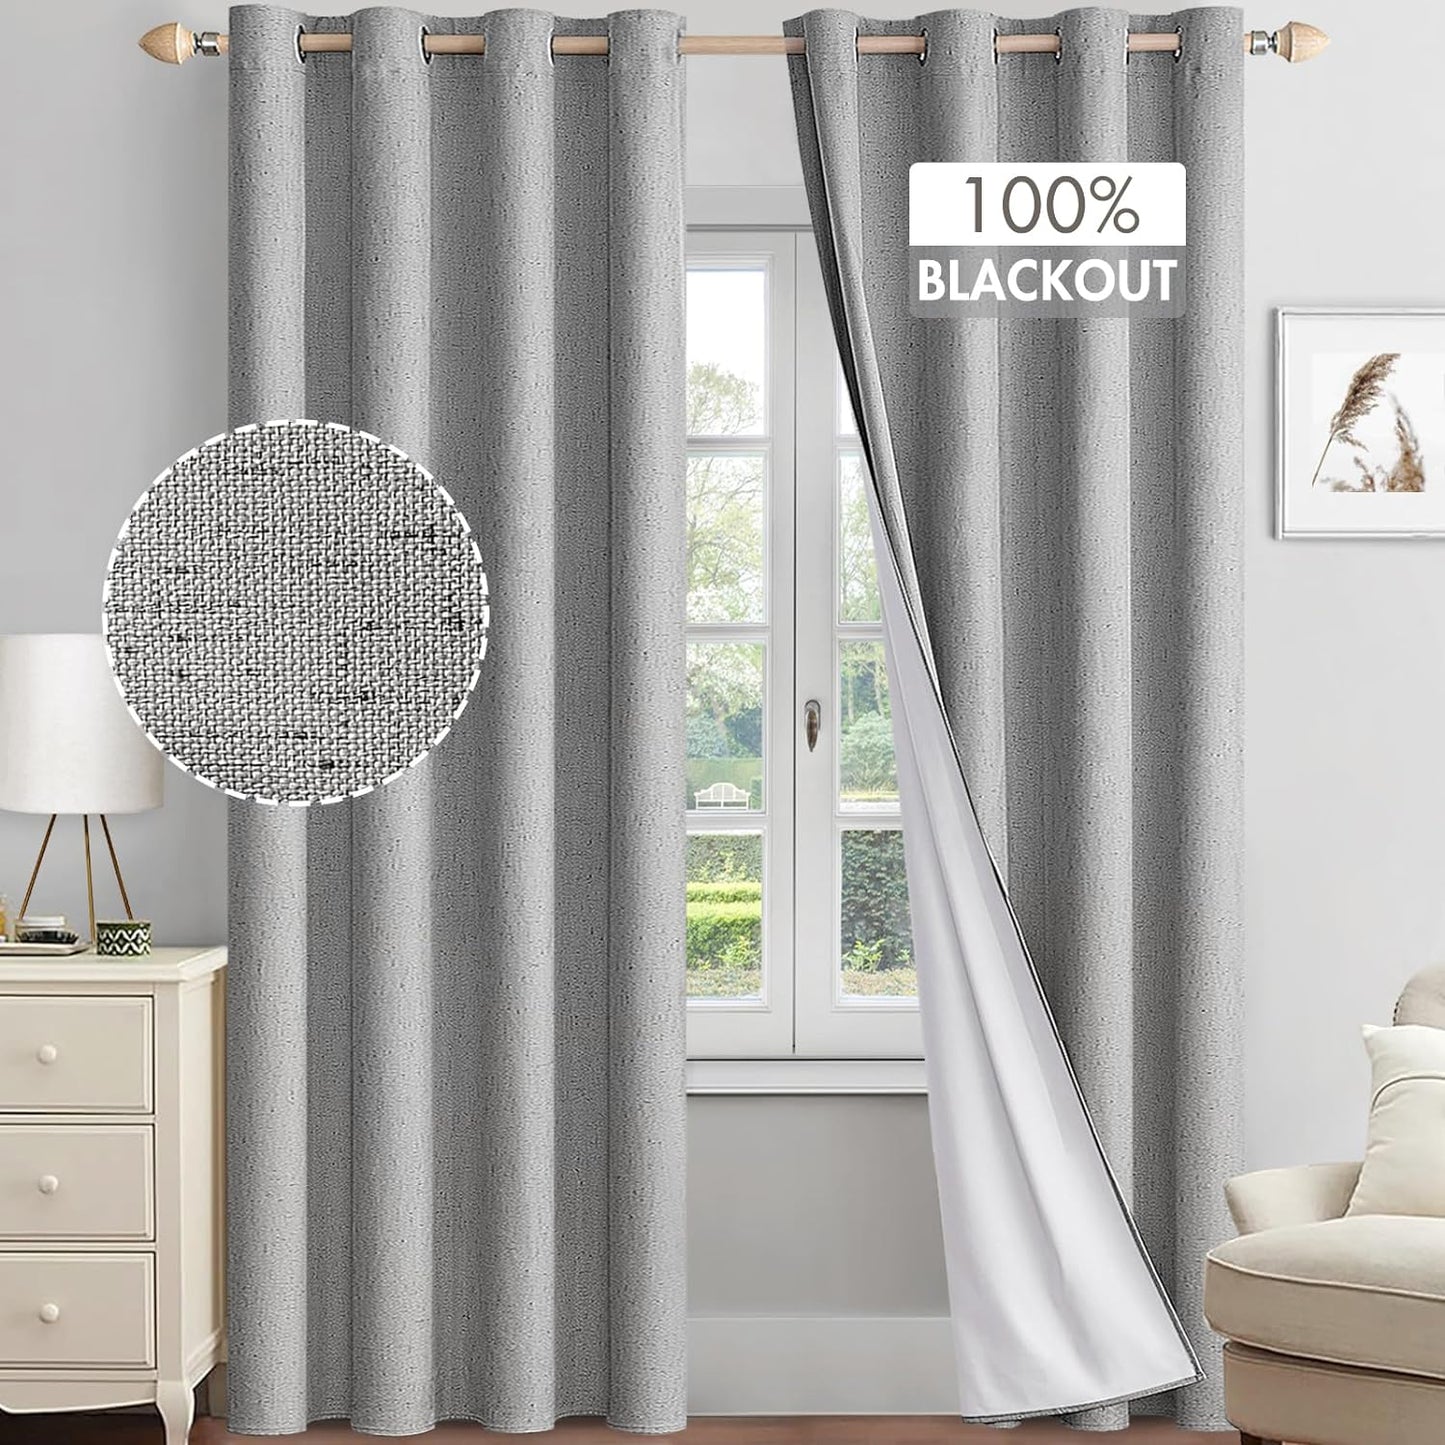 MIULEE Linen Textured 100% Blackout Curtains for Bedroom 84 Inches Long Natural Beige Thermal Insulated Black Out Curtains/Draperies with White Liner for Living Room/Nursery, Grommet Top, 2 Panels  MIULEE Dove Gray W52Xl90 